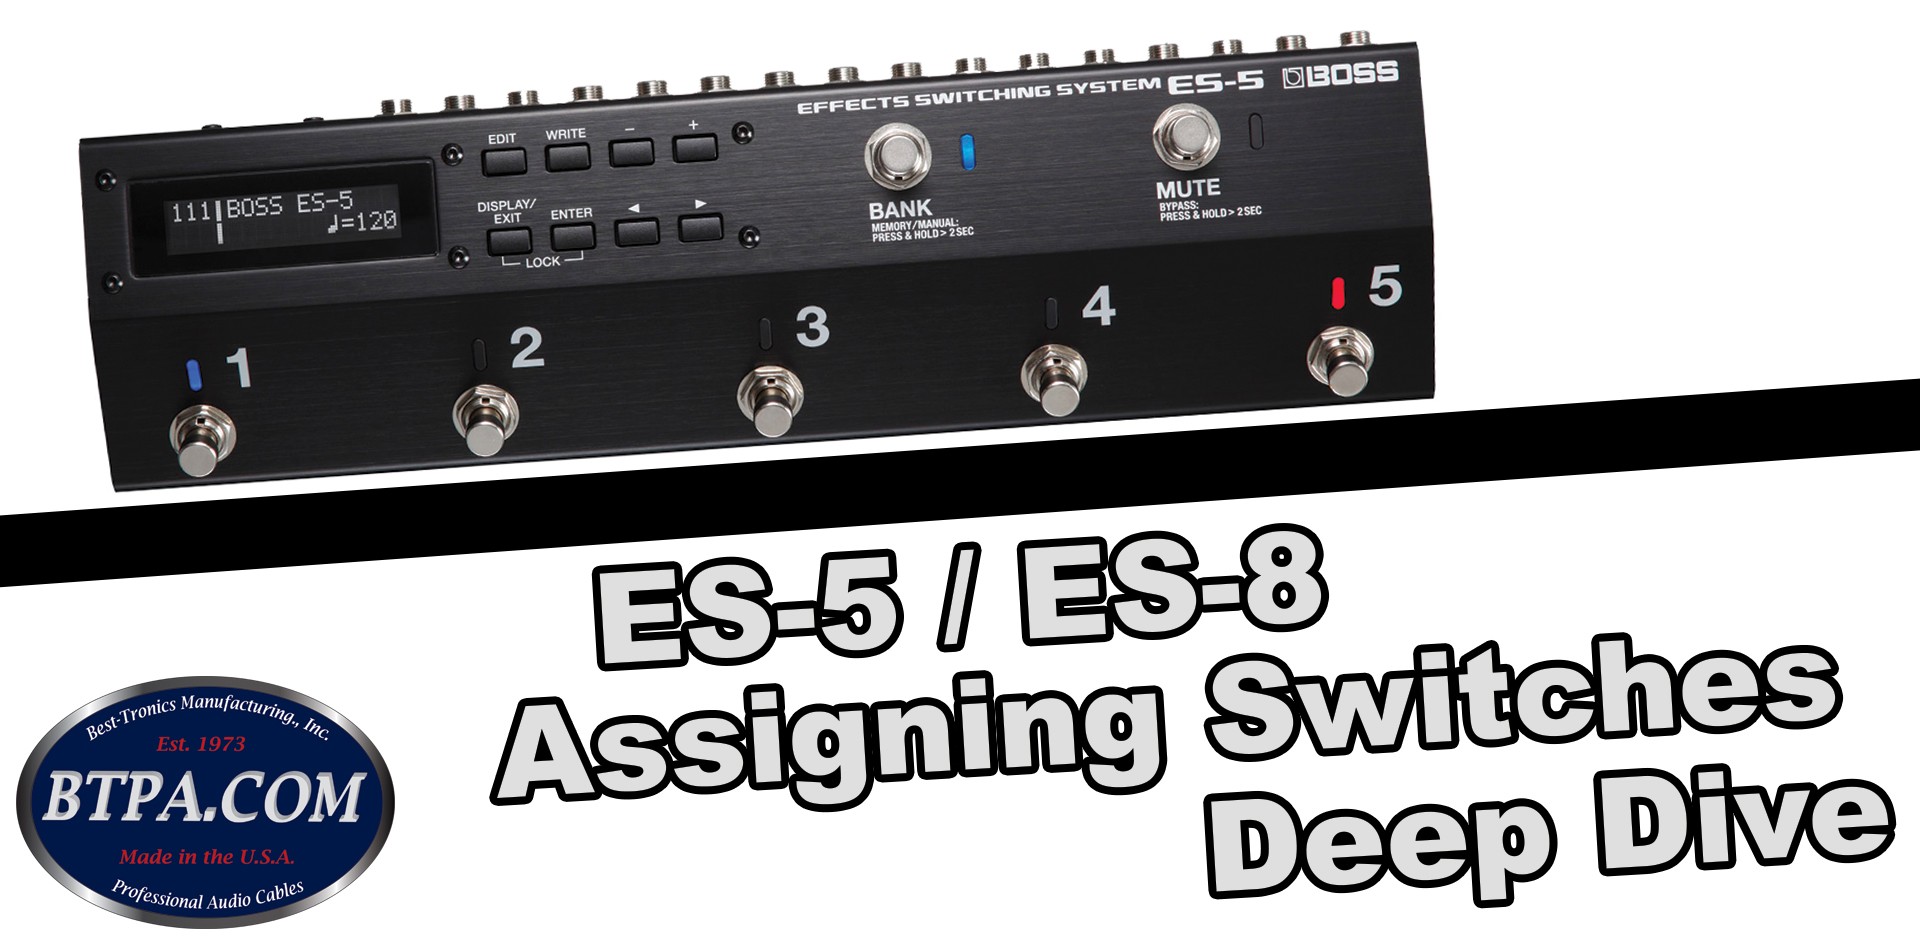 Boss "ES" Switcher Deep Dive | Assigning Switches & More!